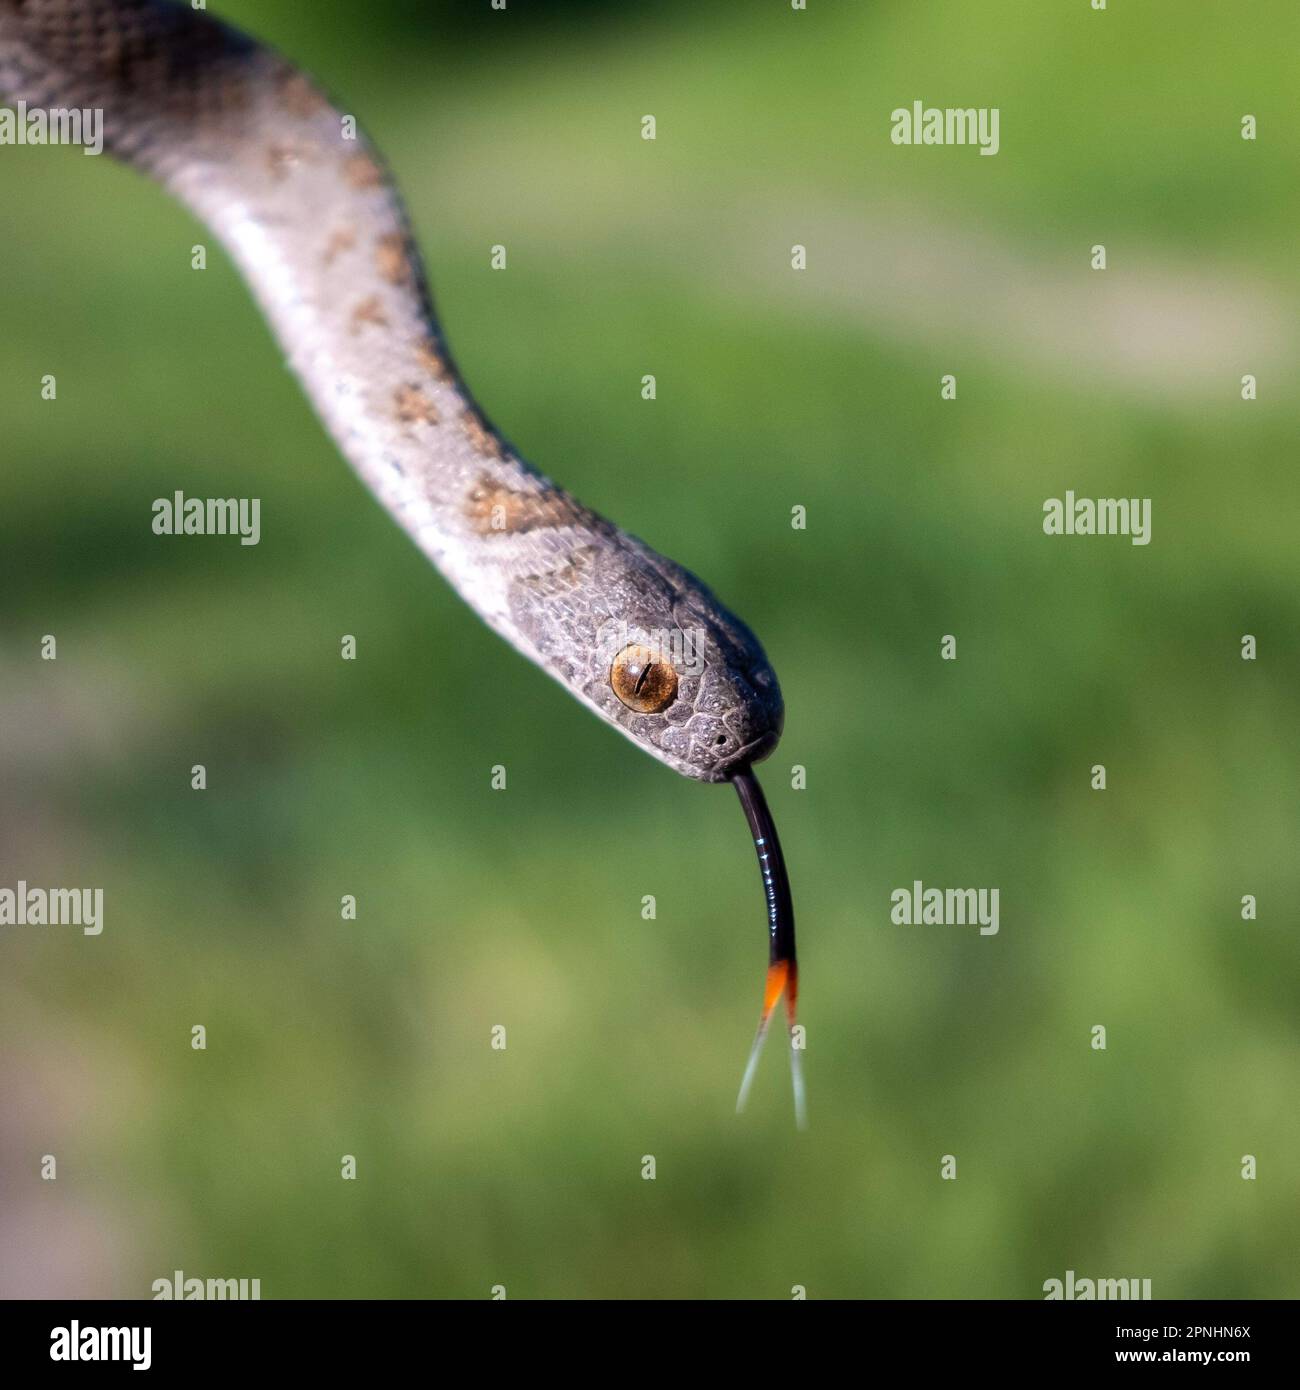 A closeup shot of a Rhombic Egg-Eater, a harmless snake from South Africa. Stock Photo